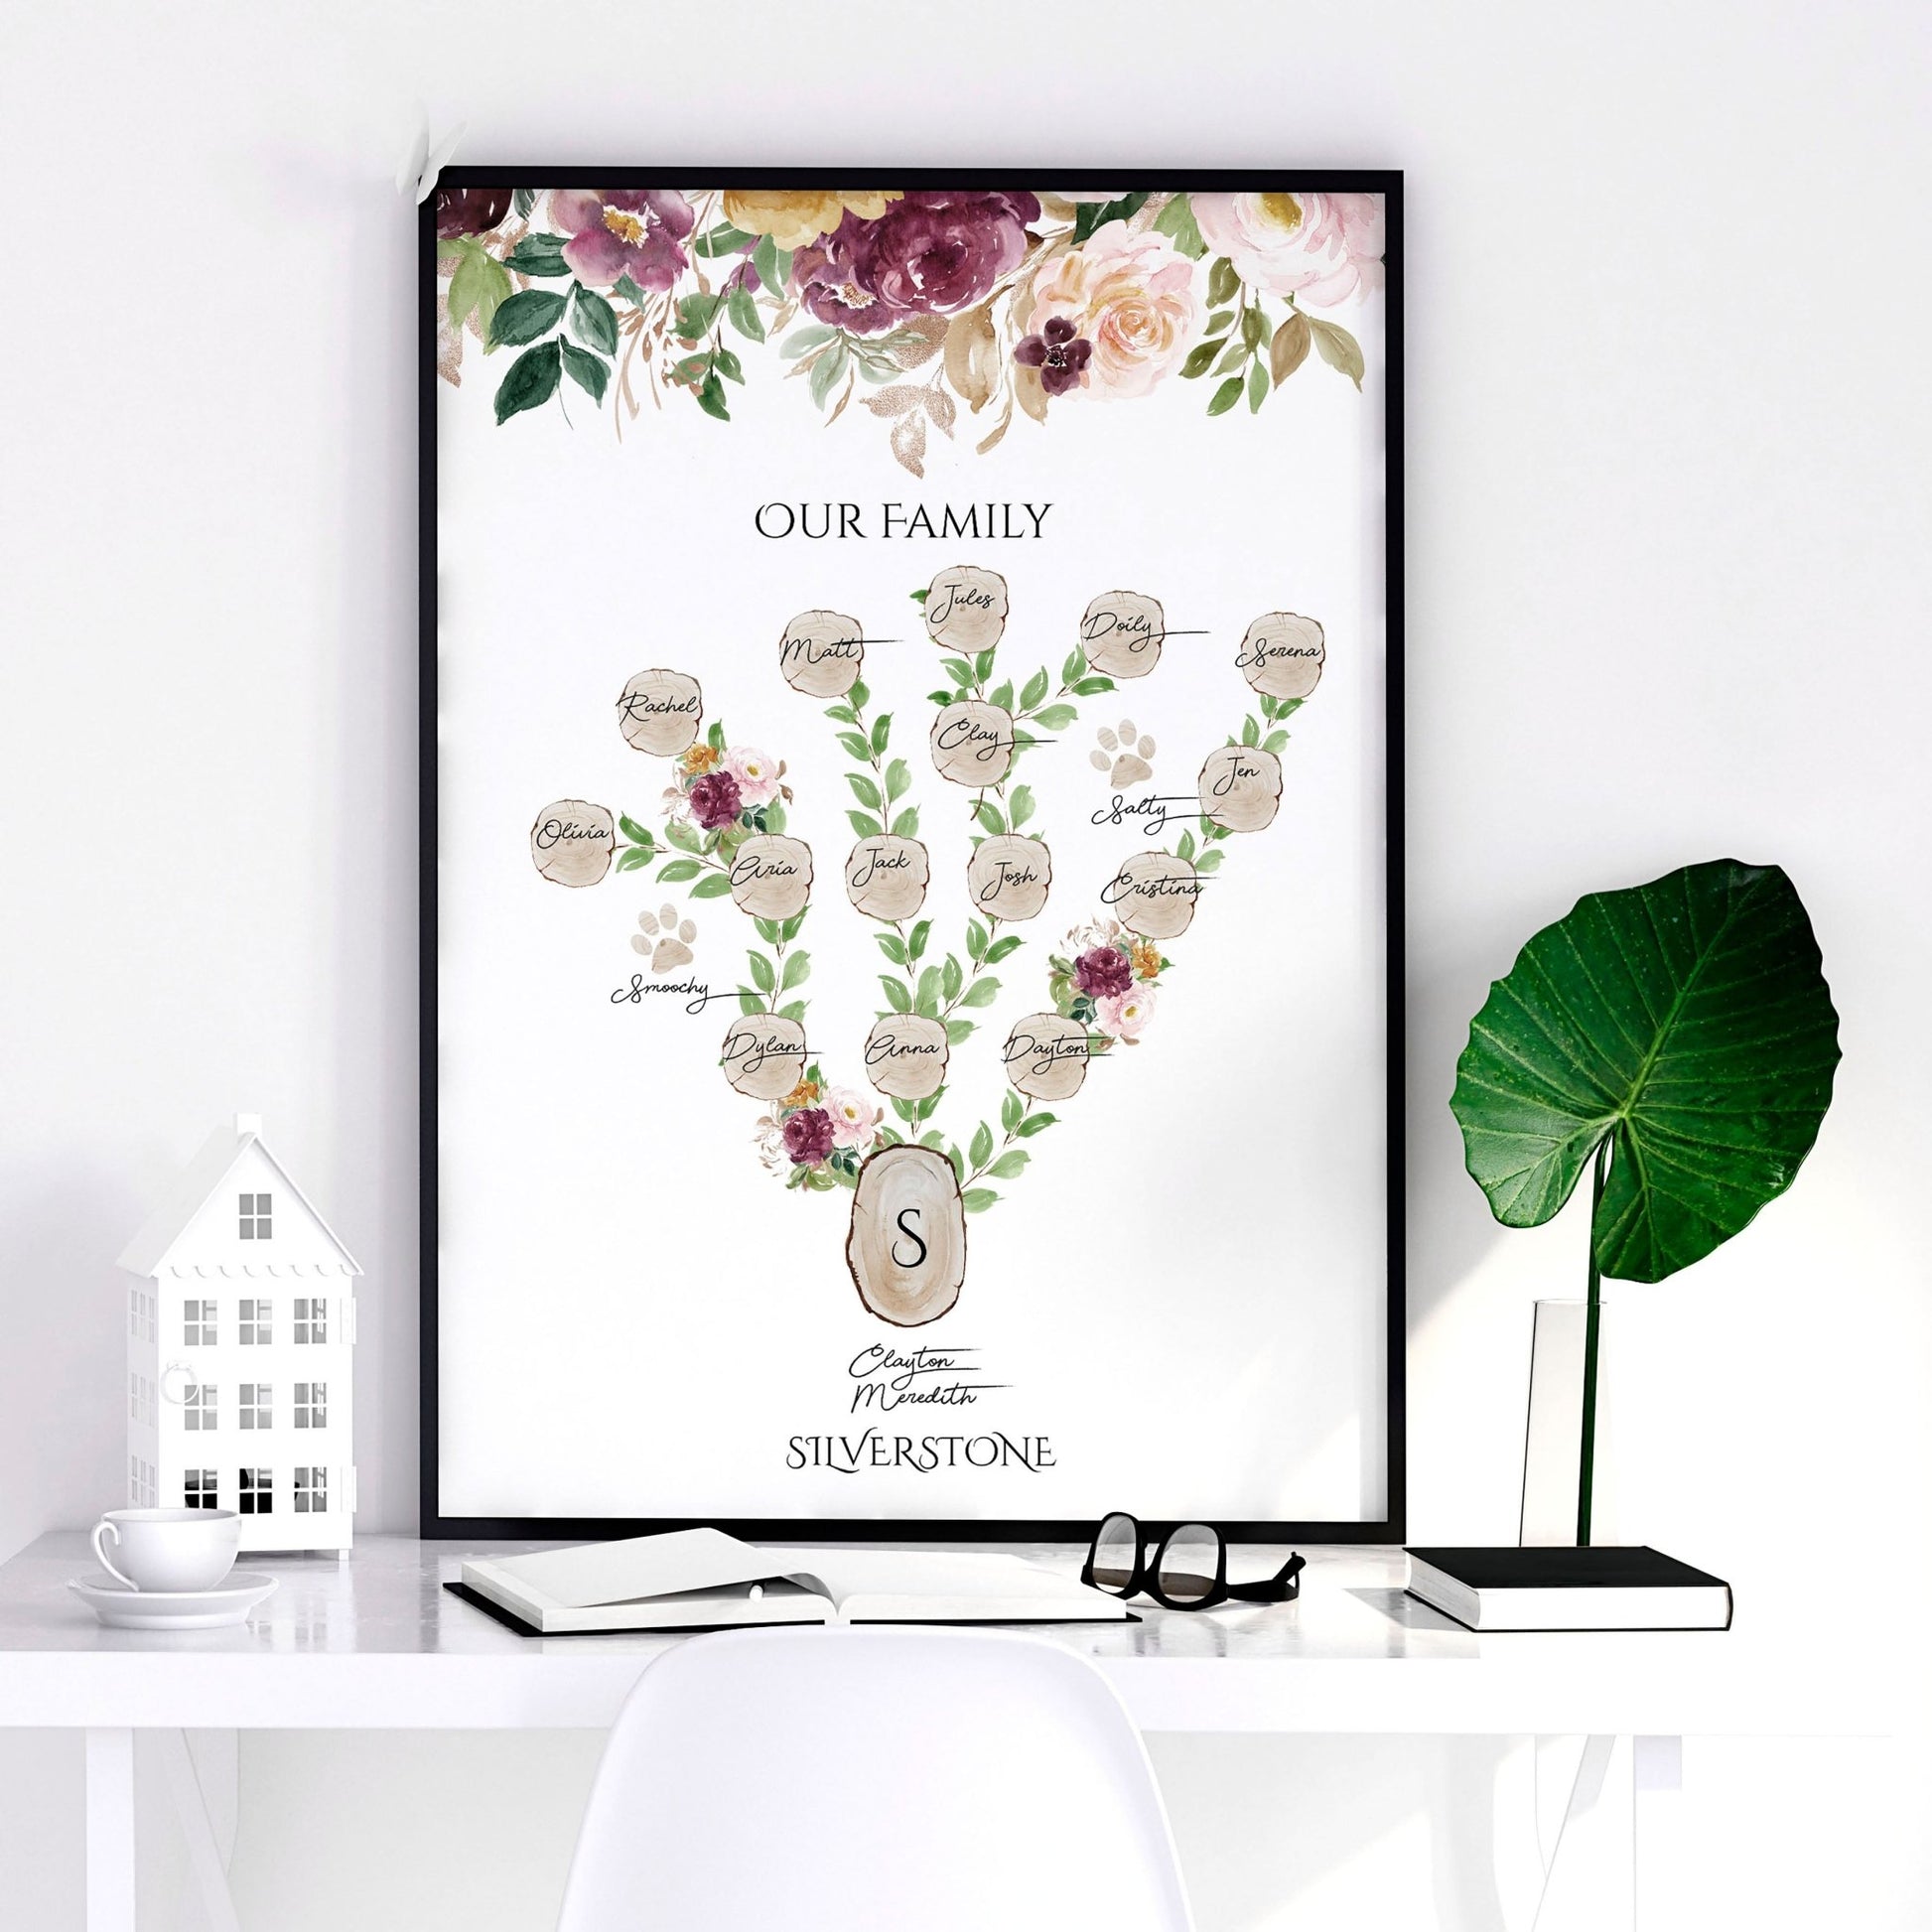 Personalised Family tree for wall decor | Wall art print - About Wall Art